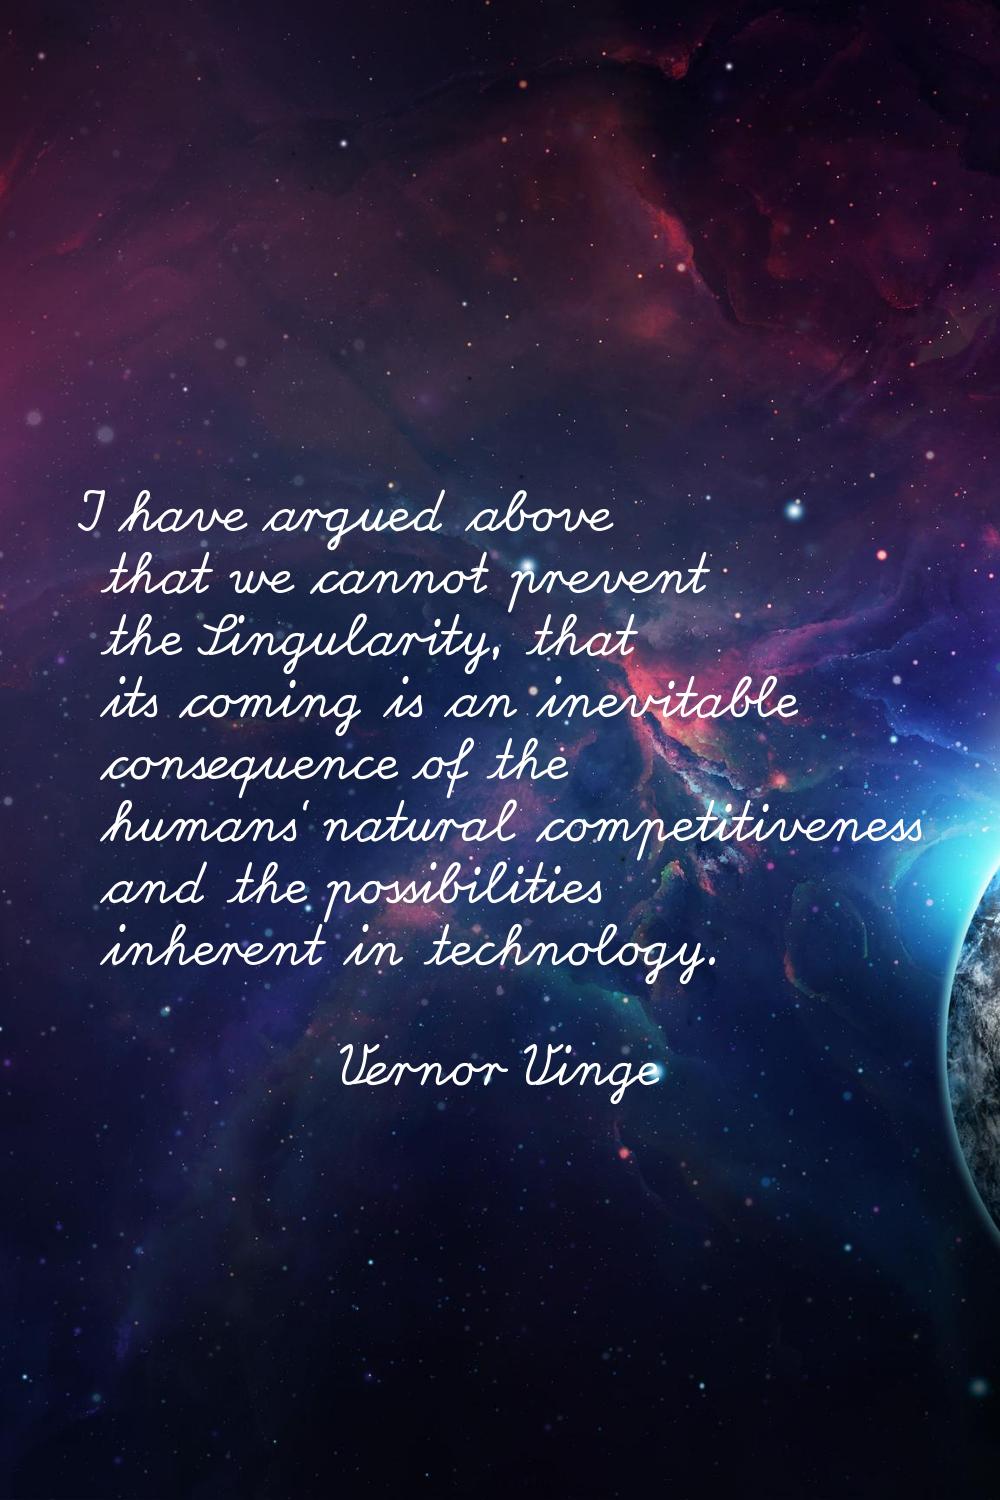 I have argued above that we cannot prevent the Singularity, that its coming is an inevitable conseq